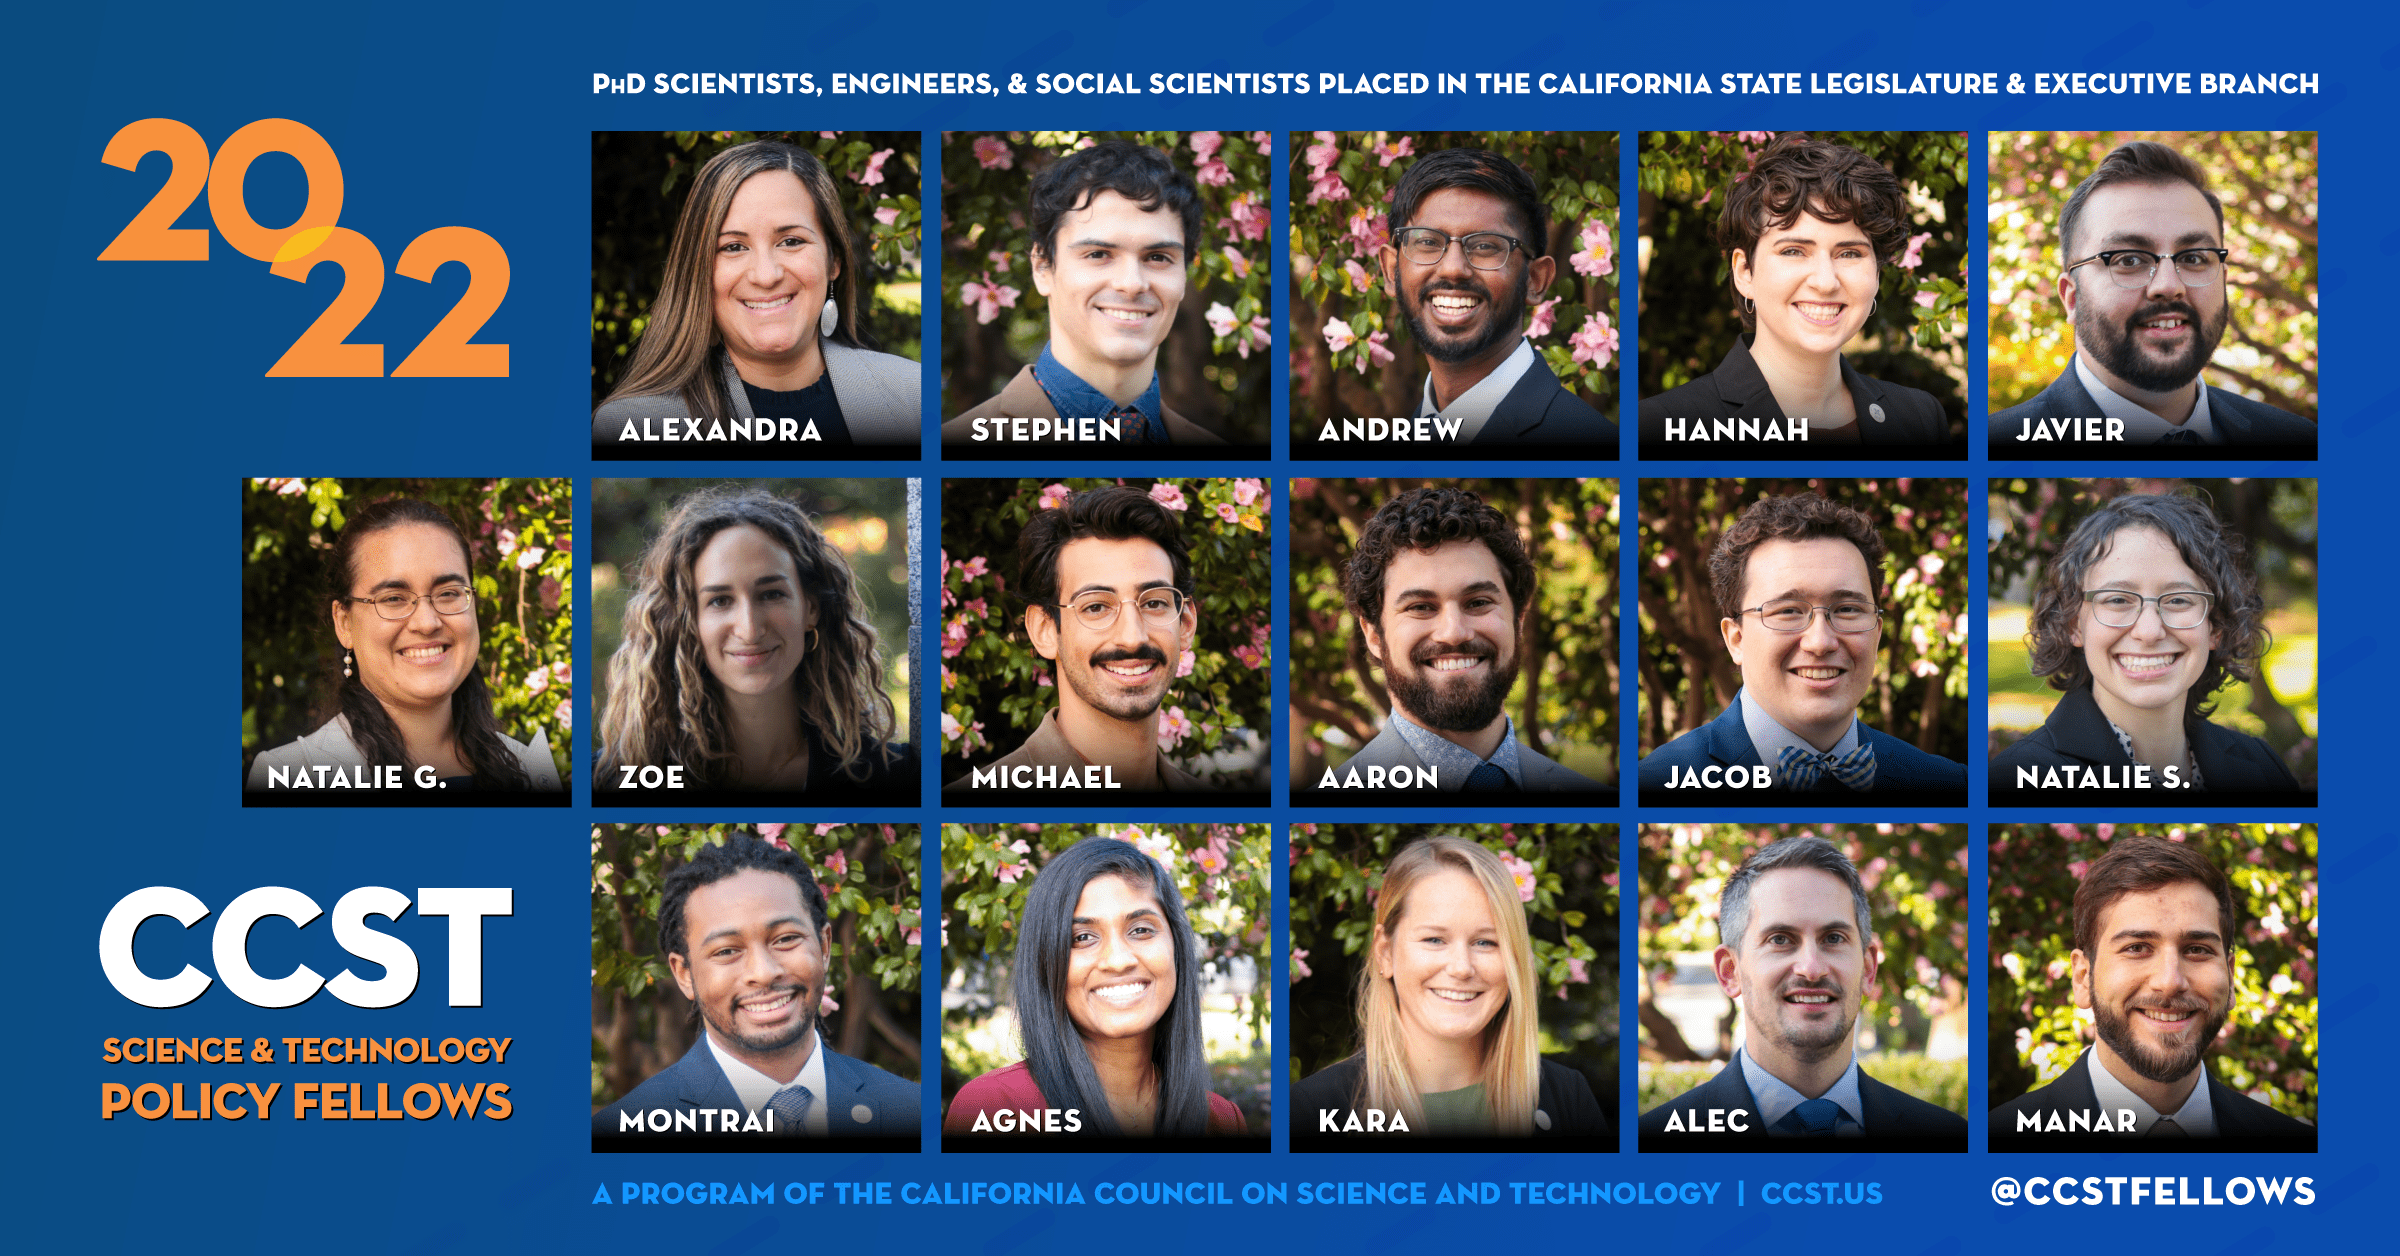 Headshots of the 2022 Fellows in a grid on a blue background